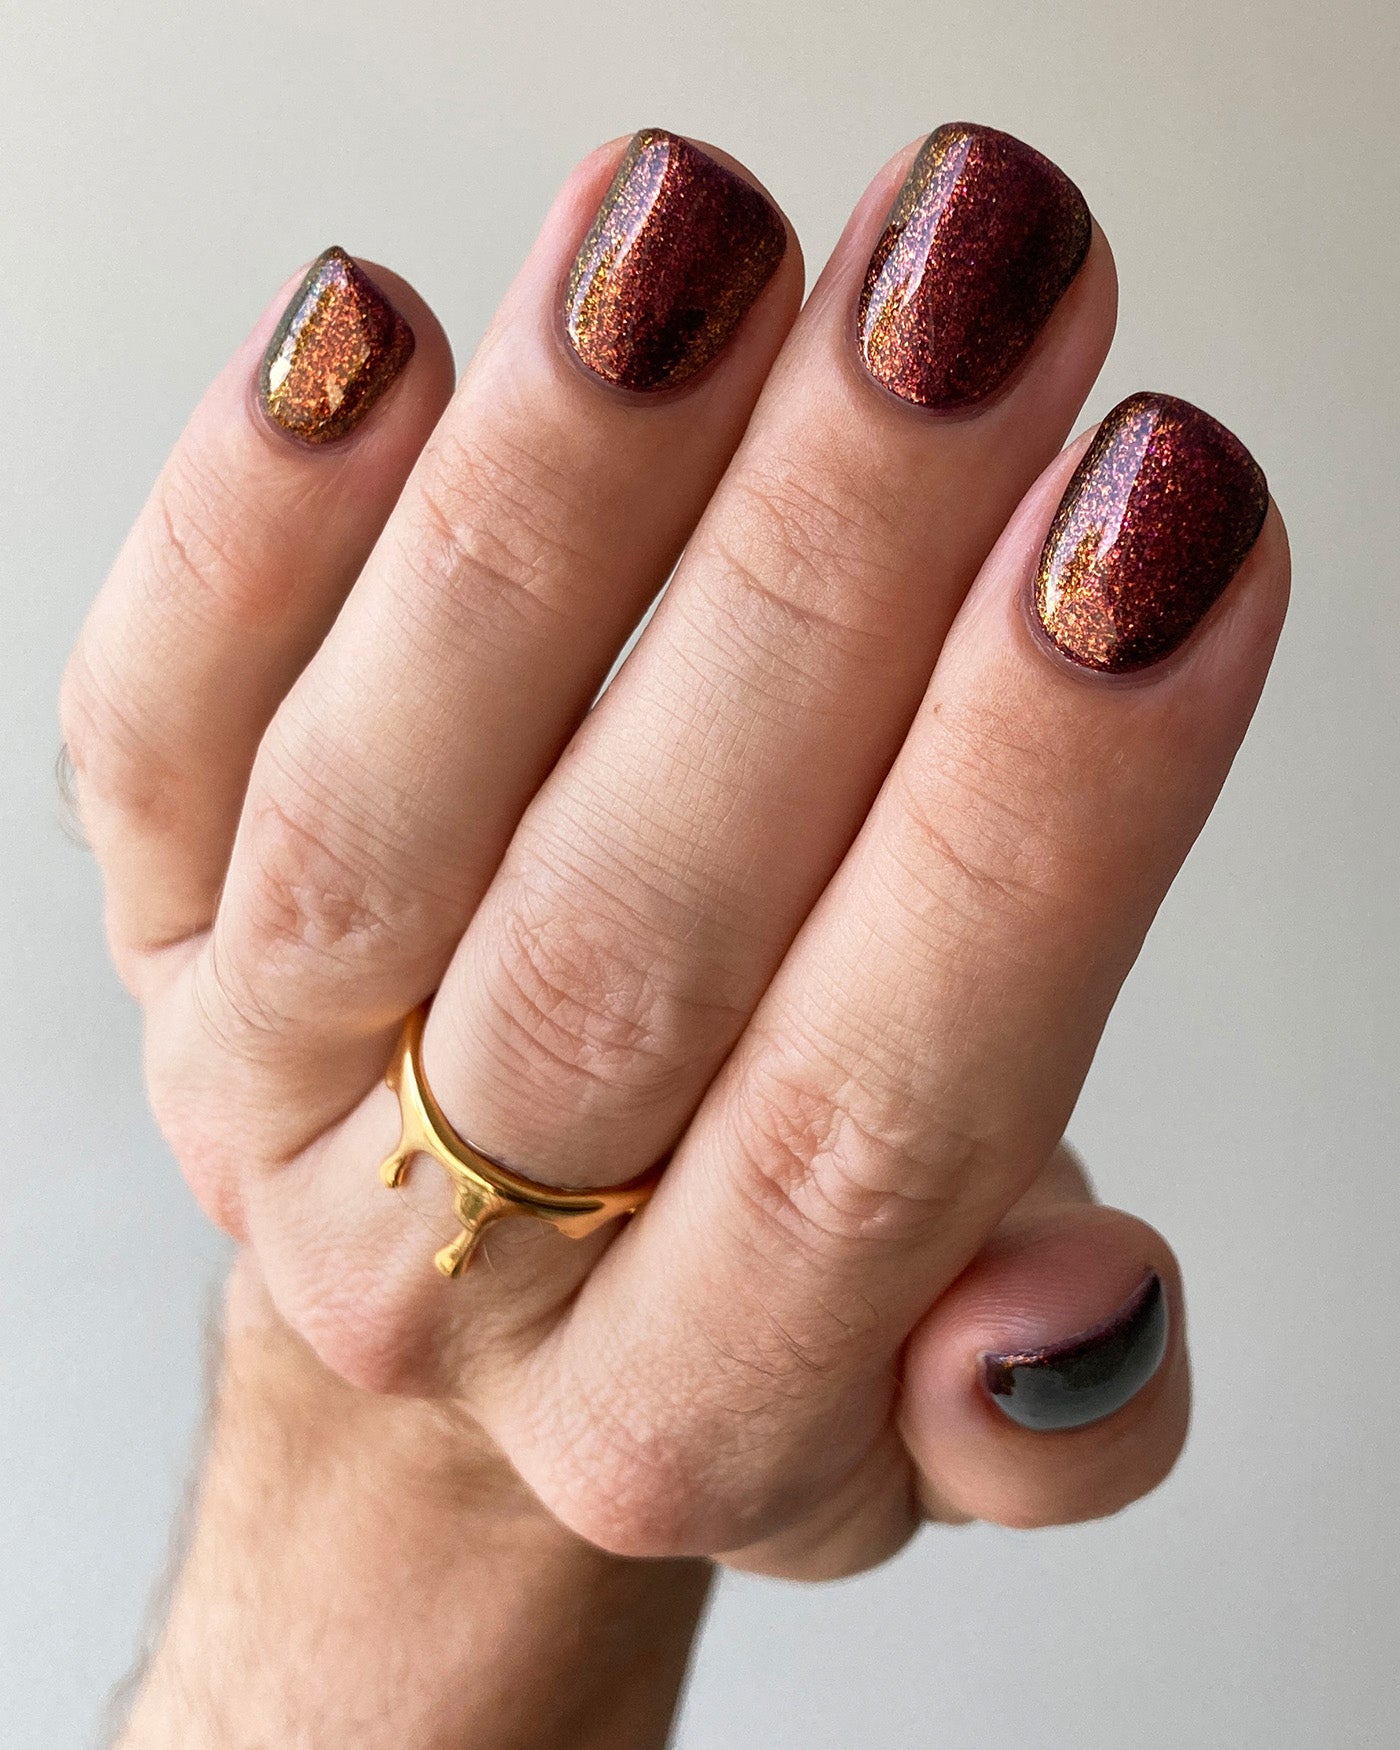 Manicure Monday: A Real Show Copper – OPI GelColor Lovers